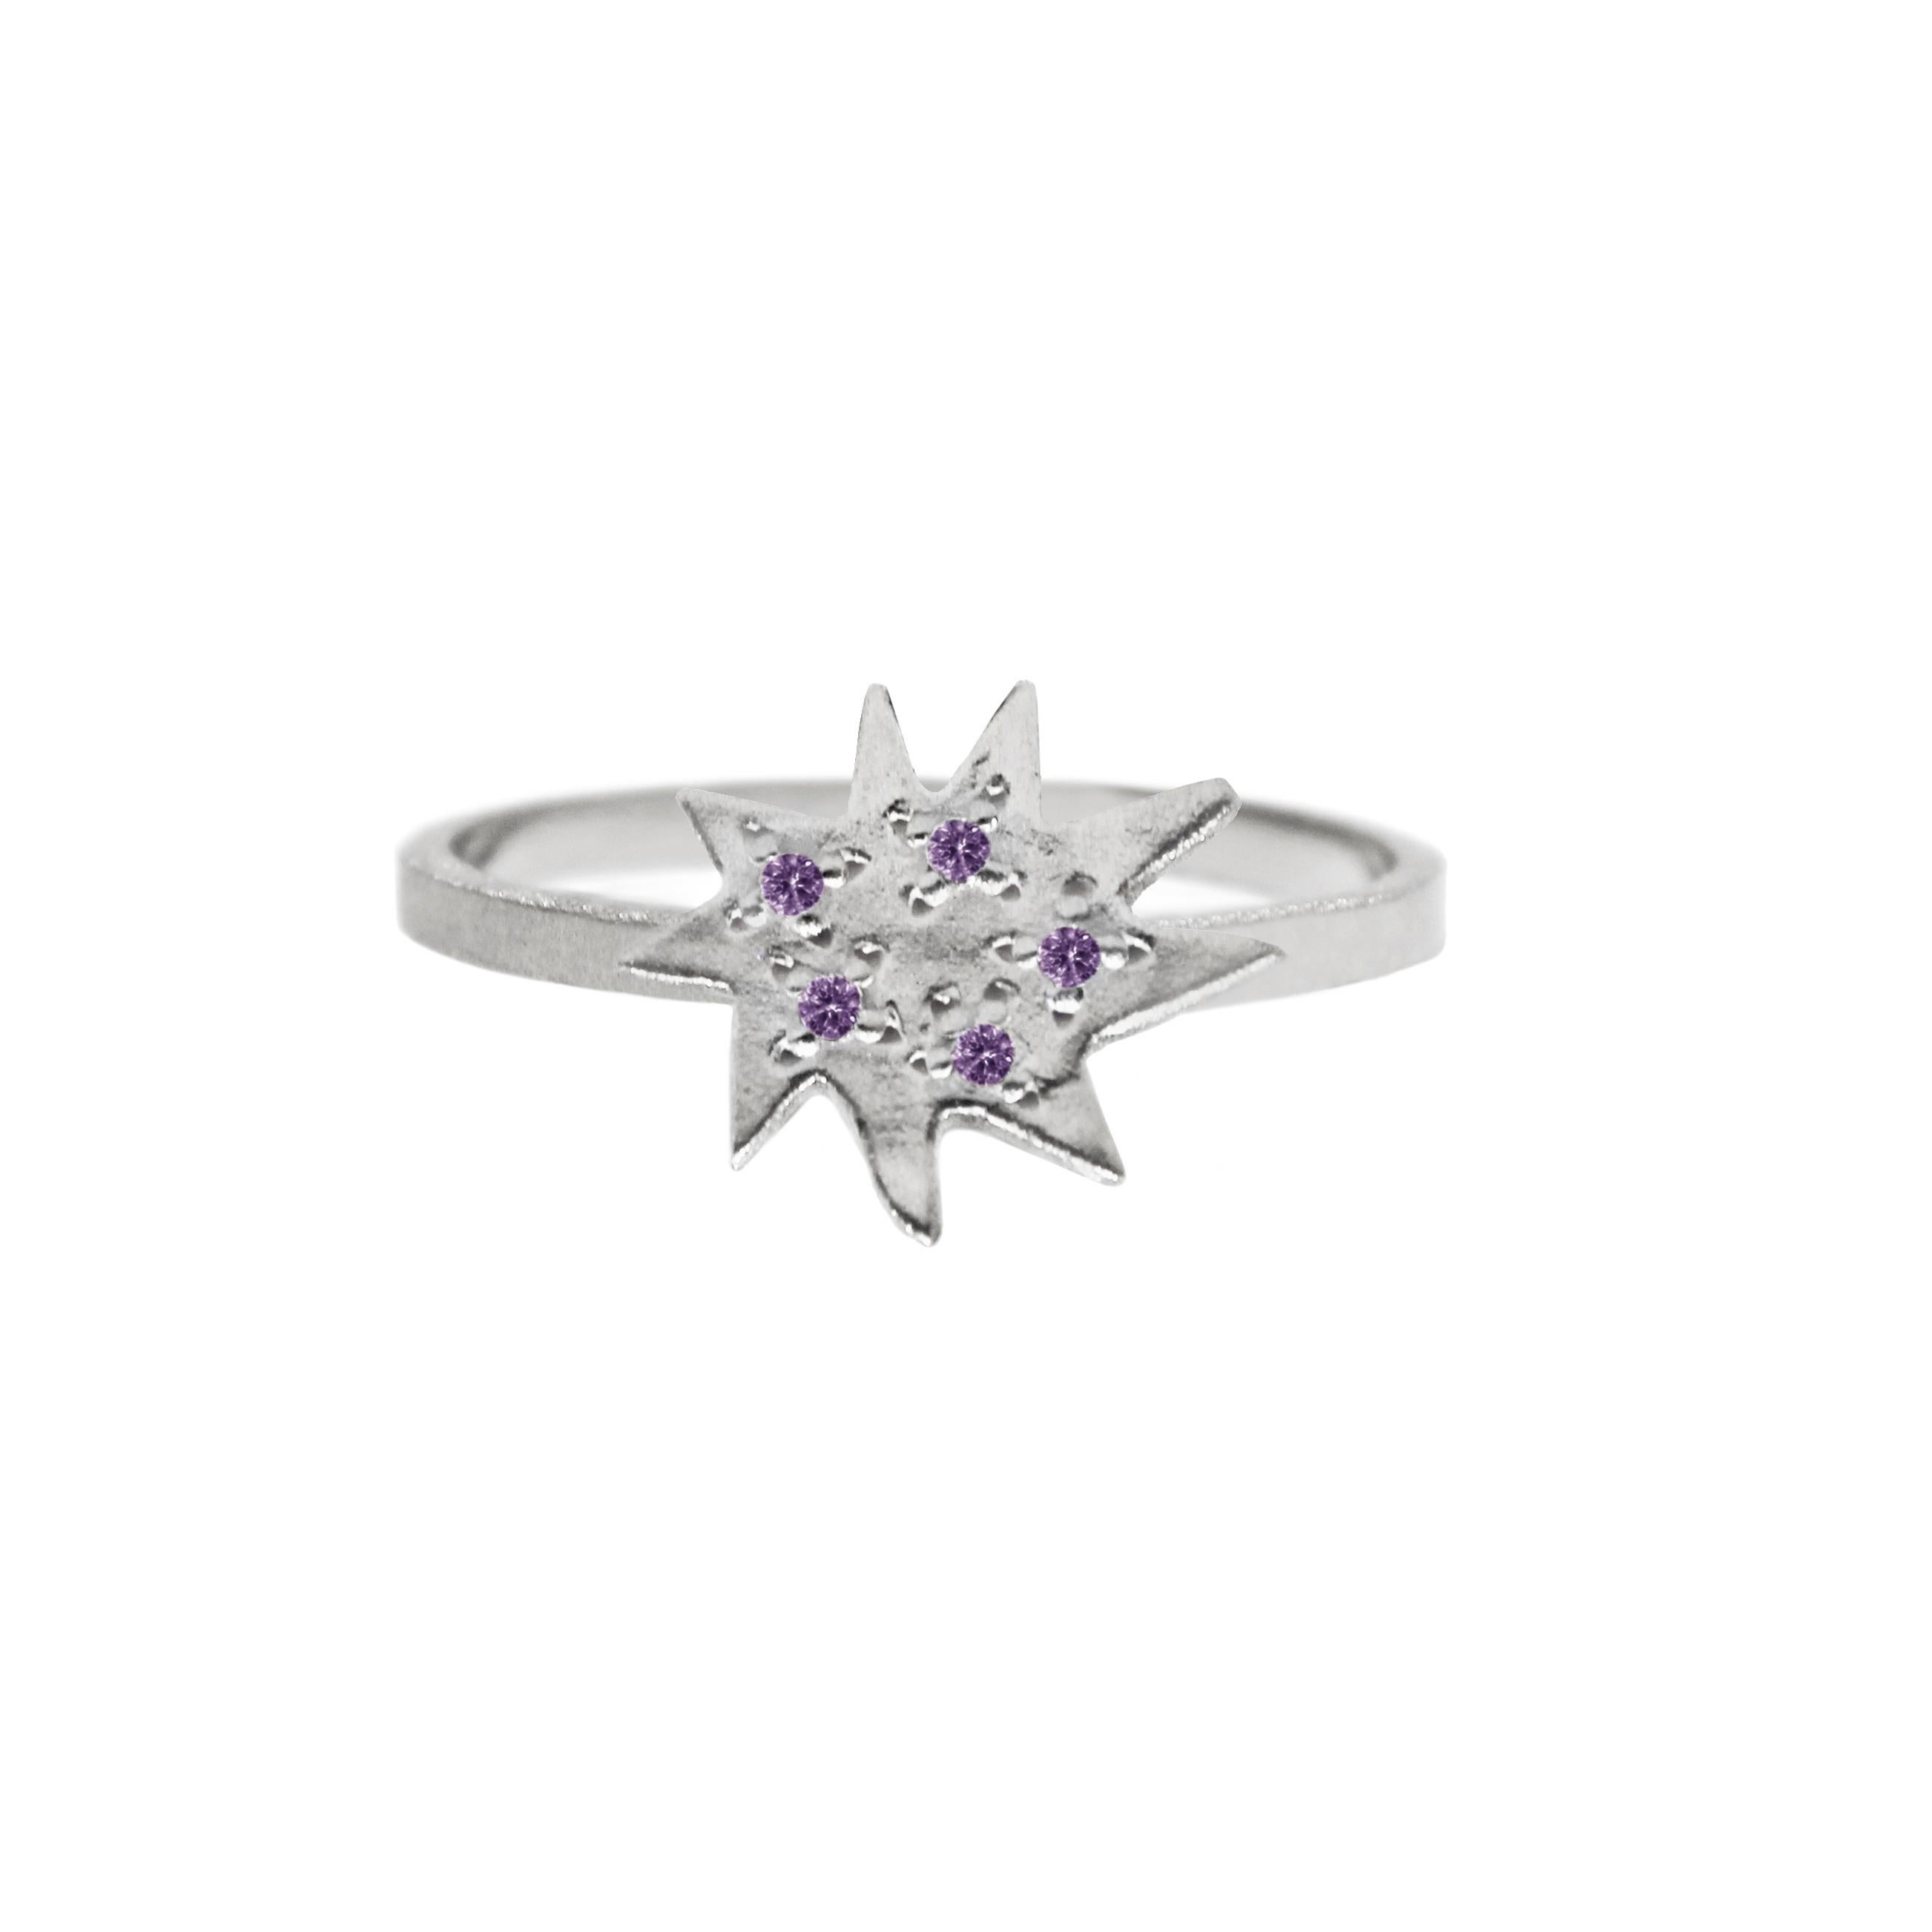 The Mini Stella Ring is here! Our sweet little ring stands strong or on its own or stacked, and also complements all our other Stella Collection pieces. Matte finish sterling silver ring with our Mini Stella, enhanced by 5 tiny amethysts to make it